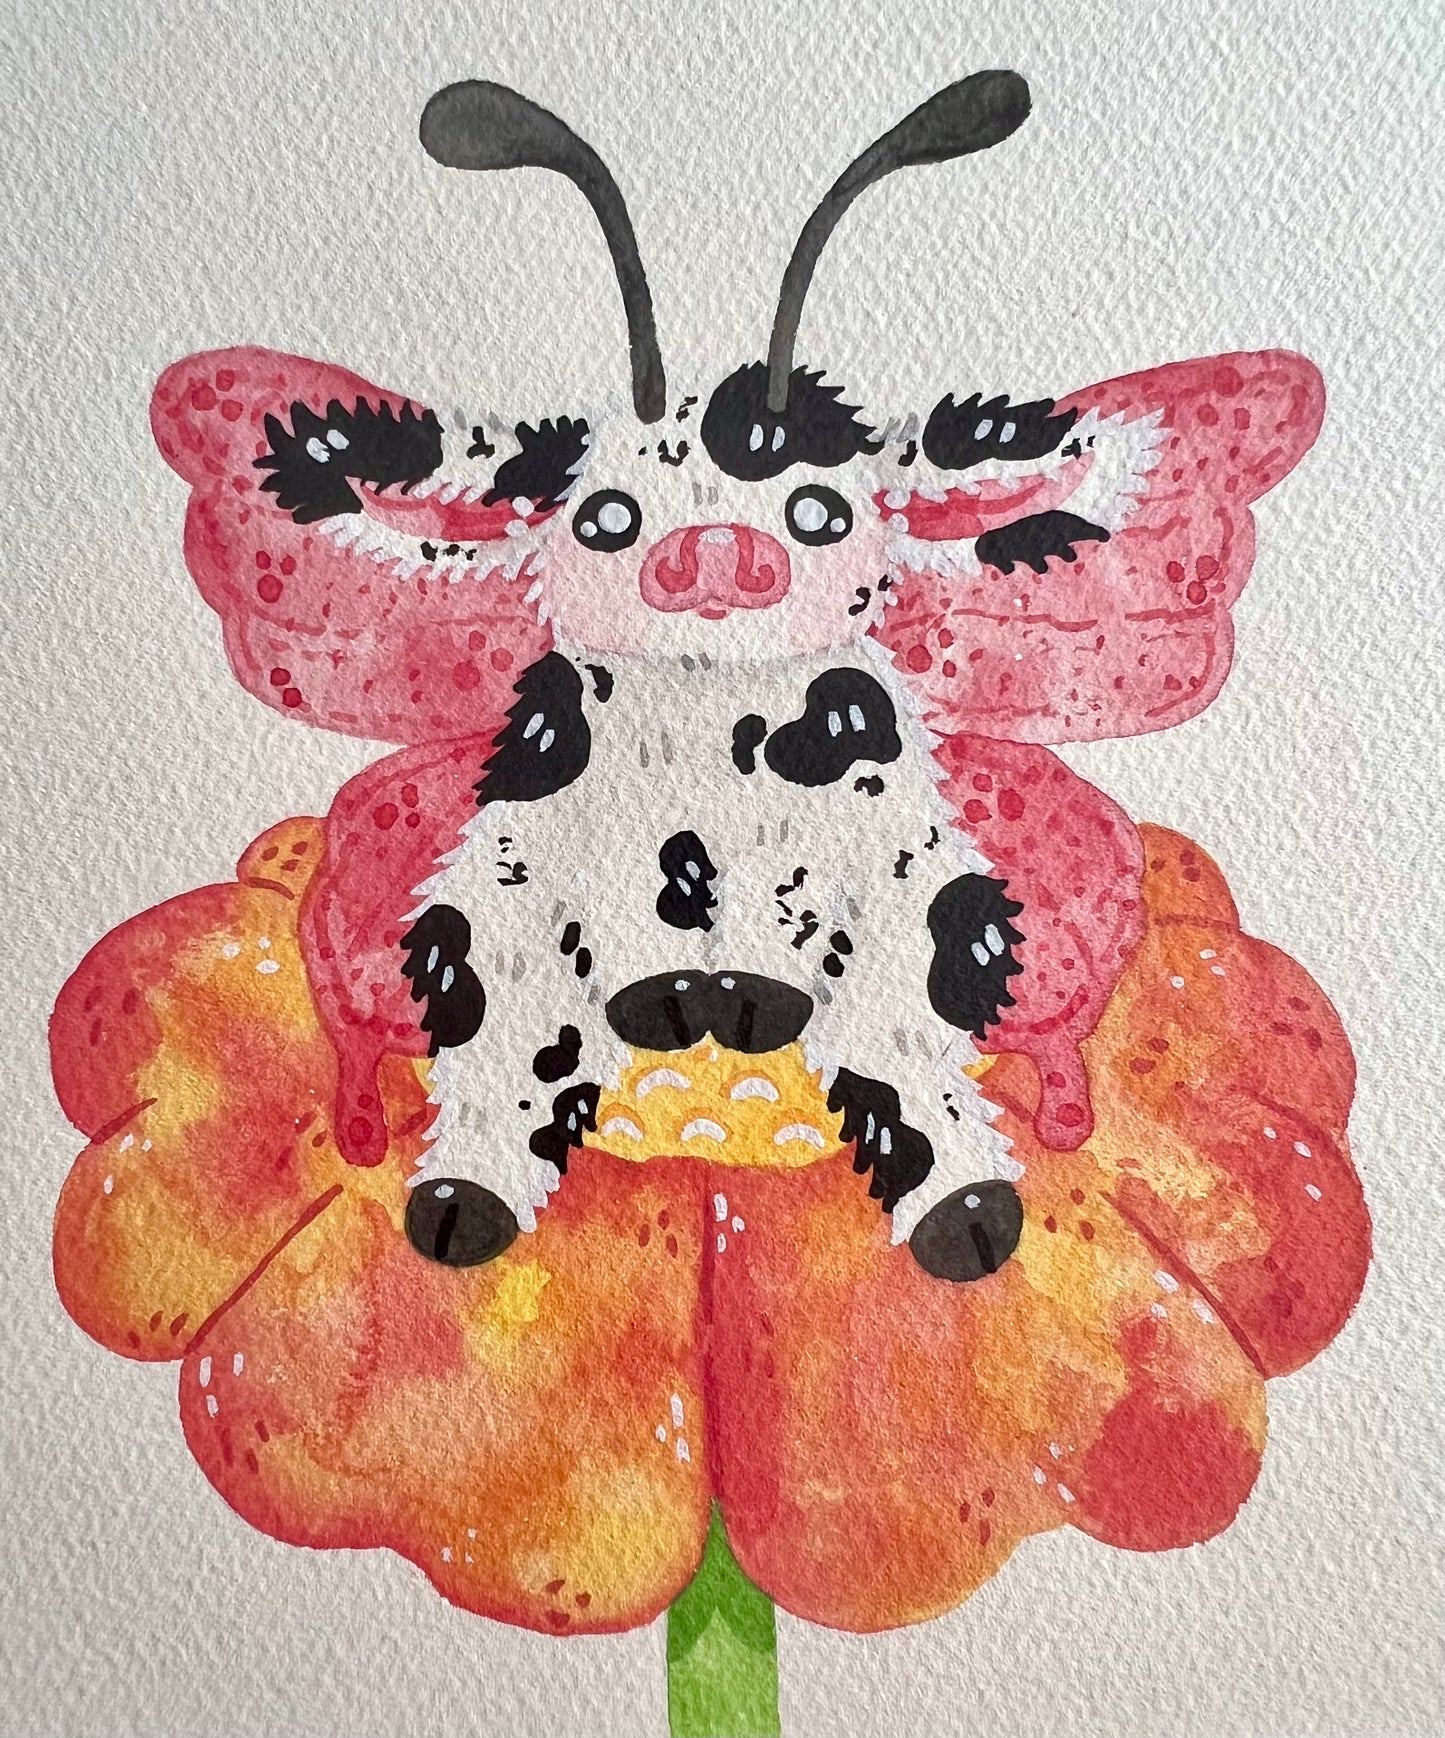 Butterfly Cow on a Flower Painting